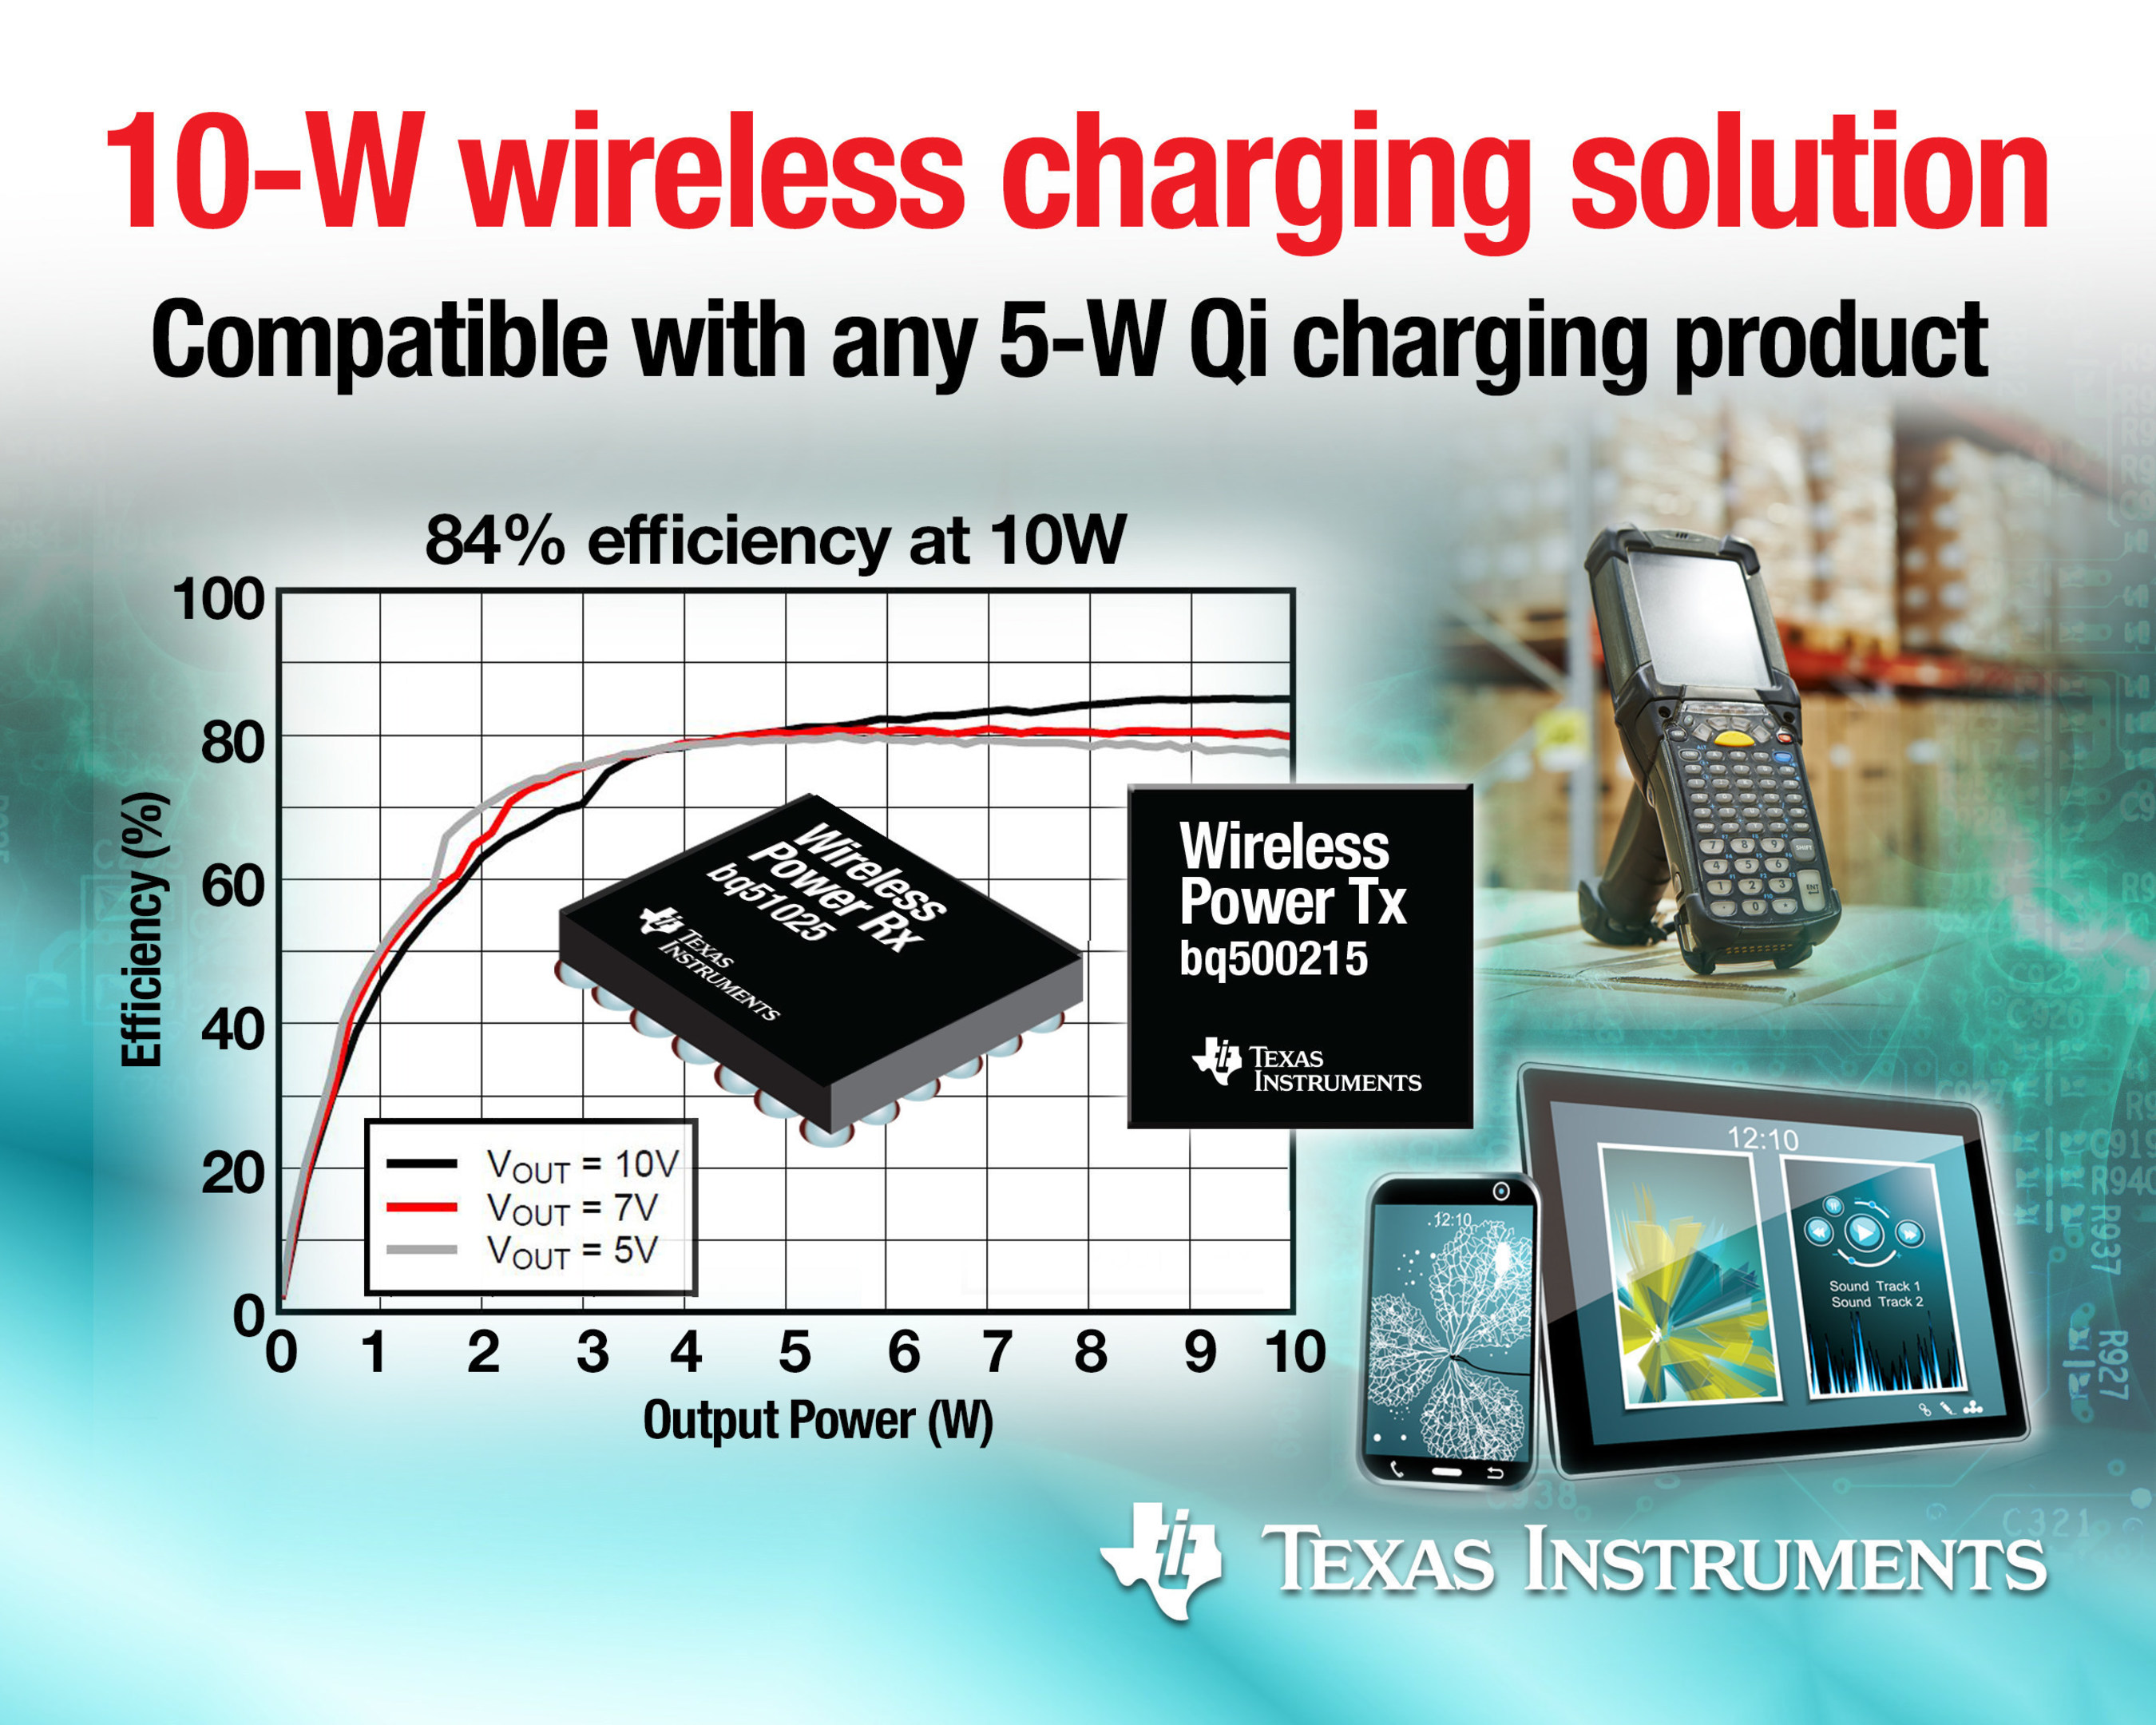 TI delivers first 10-Watt wireless charging solution